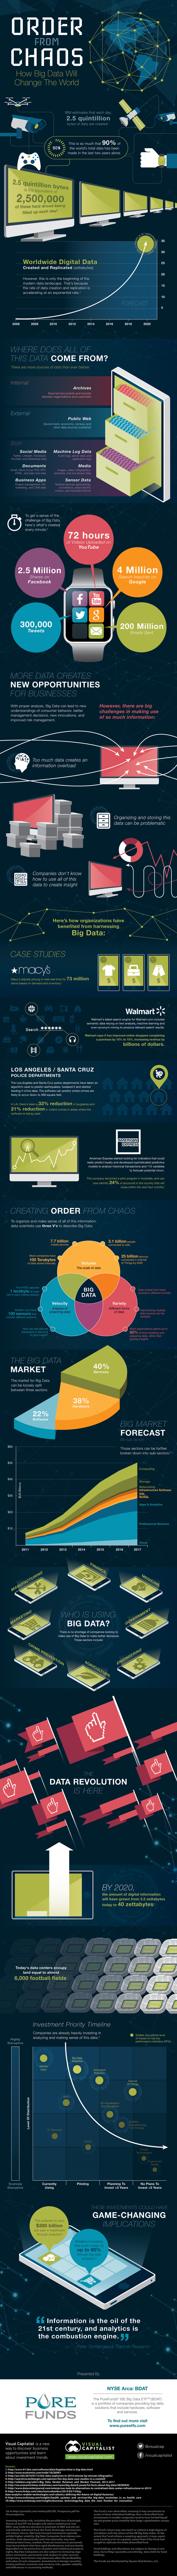 Order from Chaos- Big Data